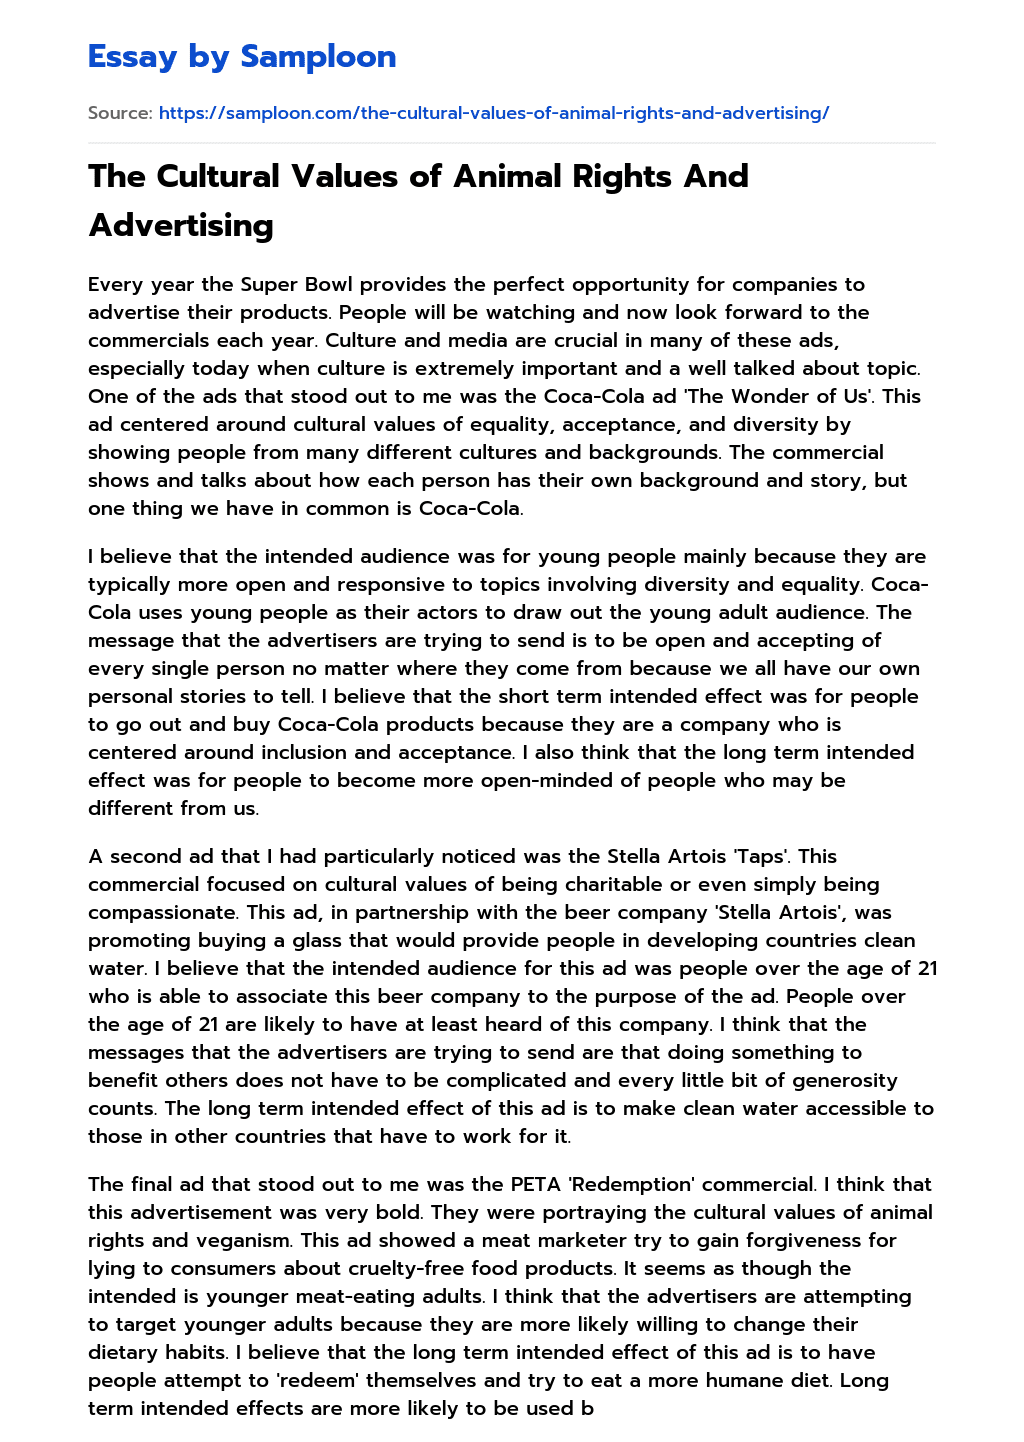 The Cultural Values of Animal Rights And Advertising essay